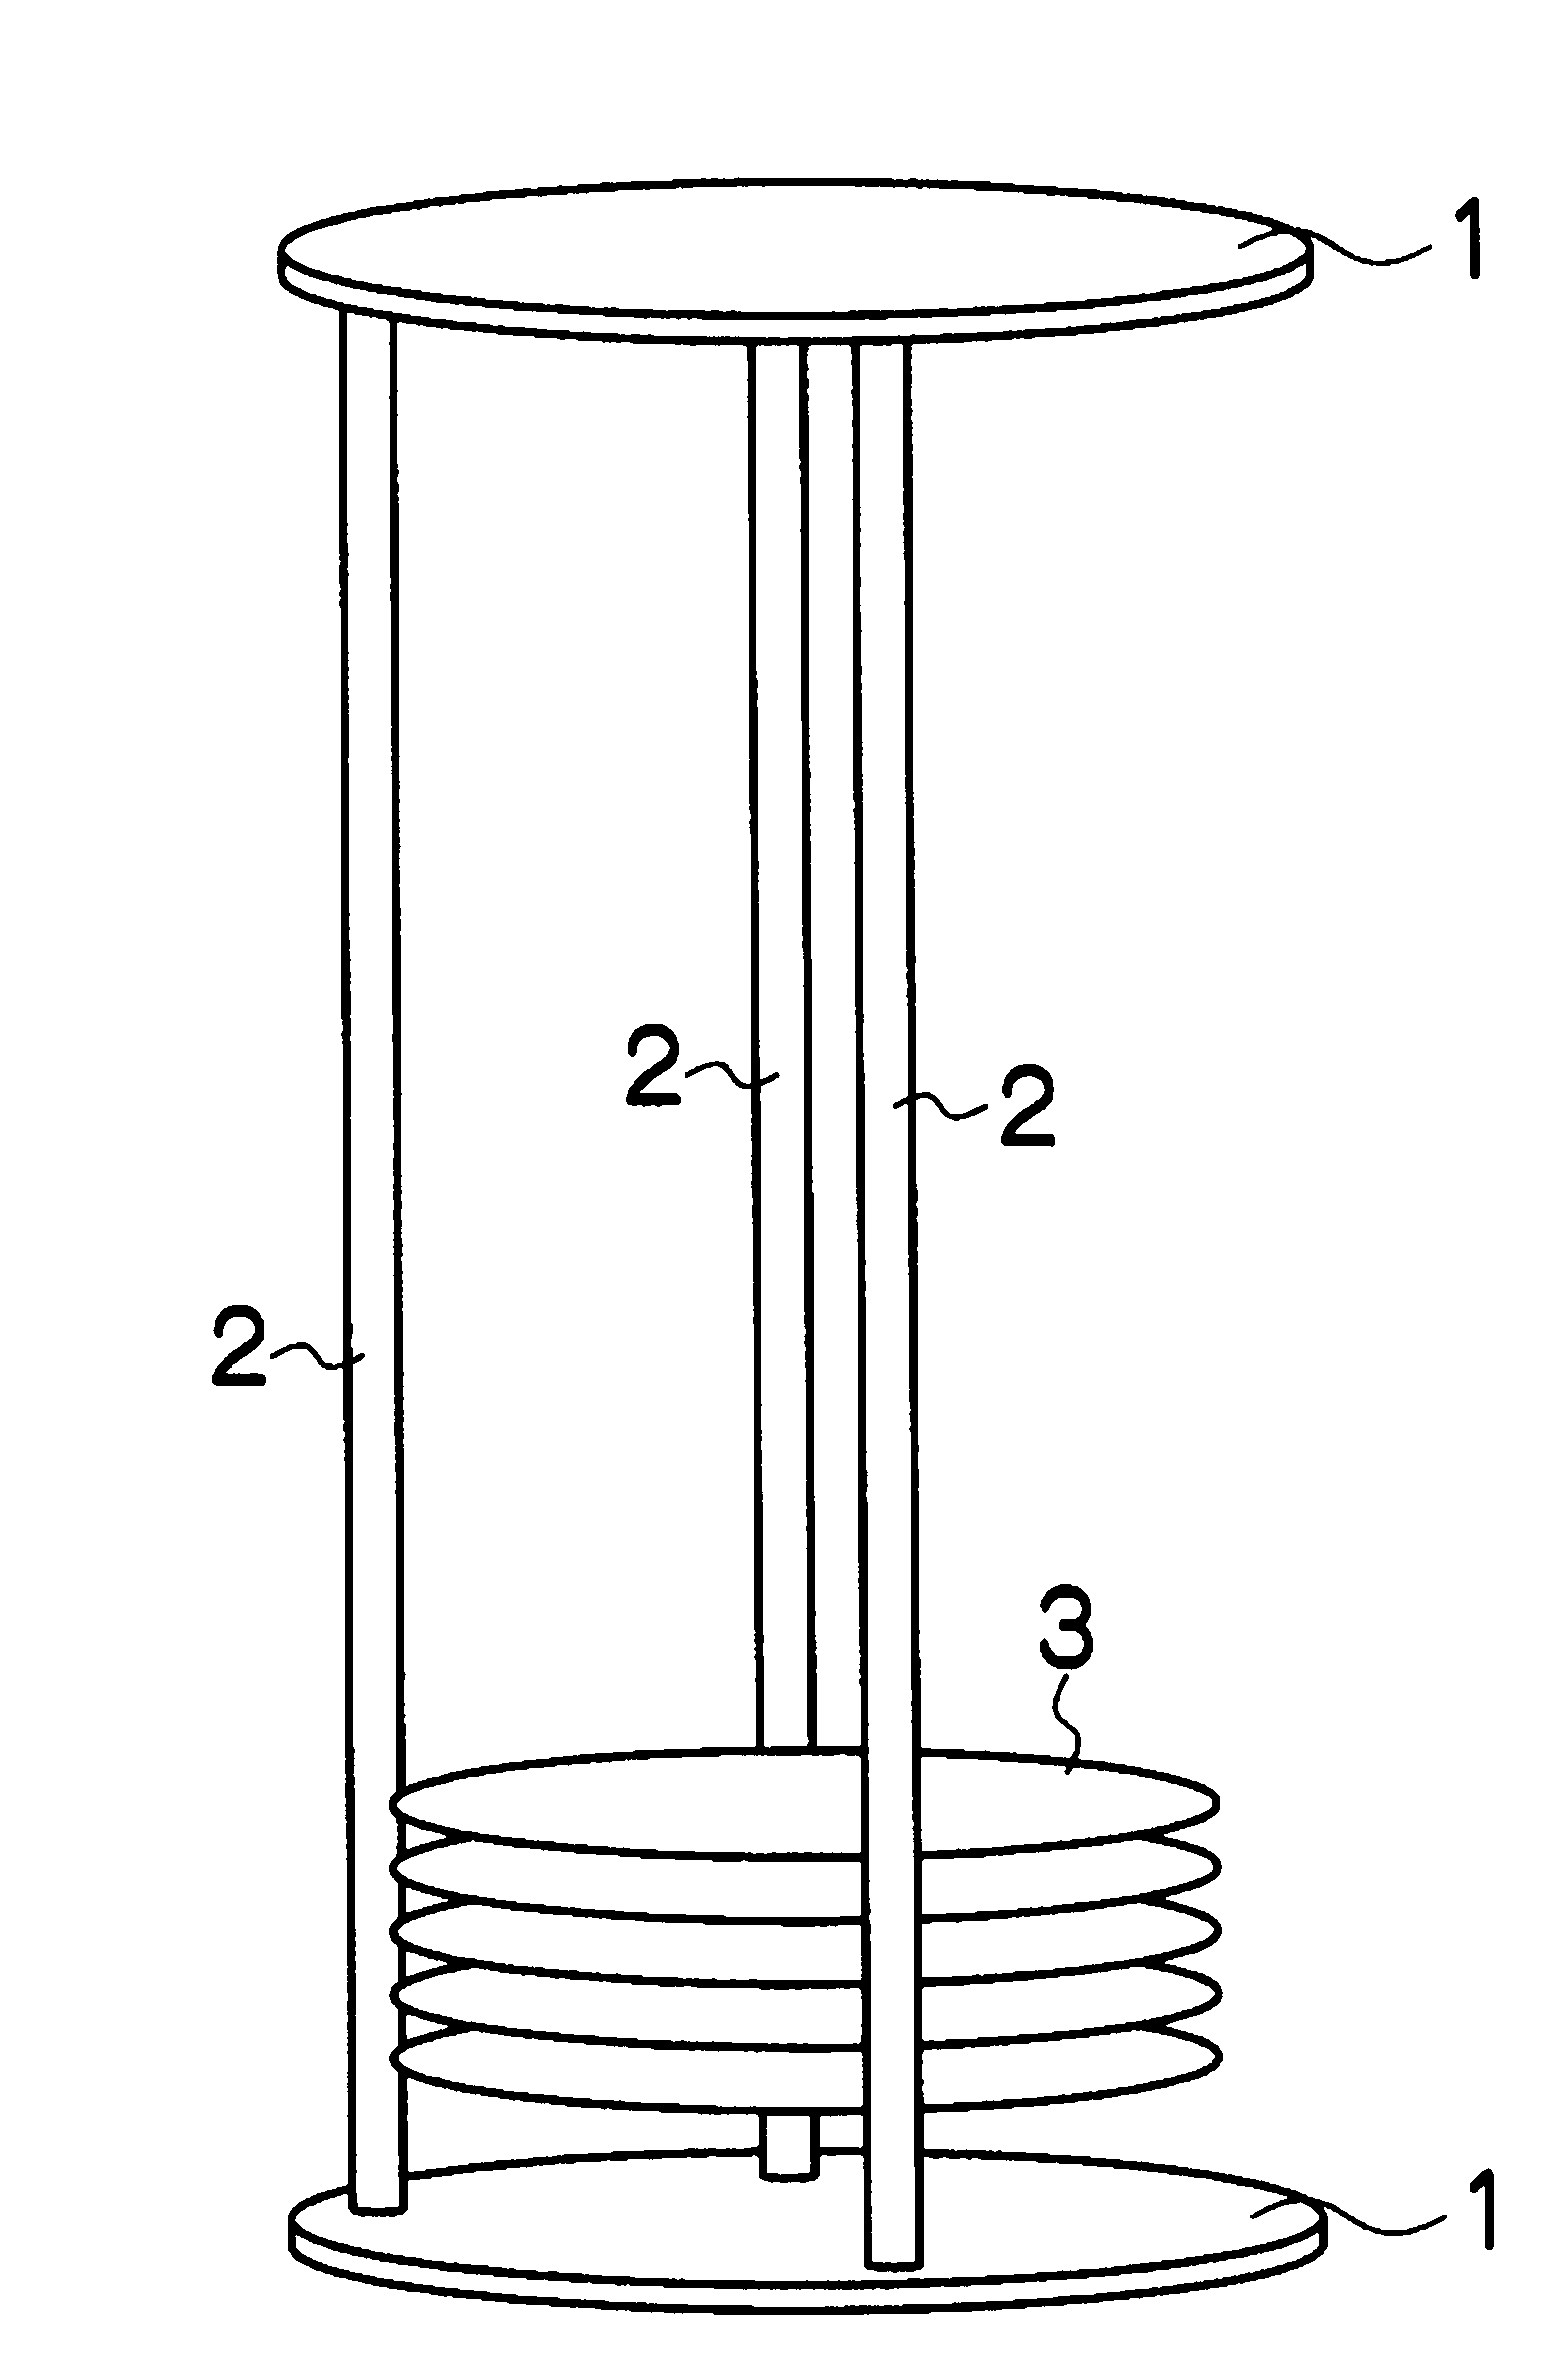 Method and apparatus for measuring shape of heat treatment jig